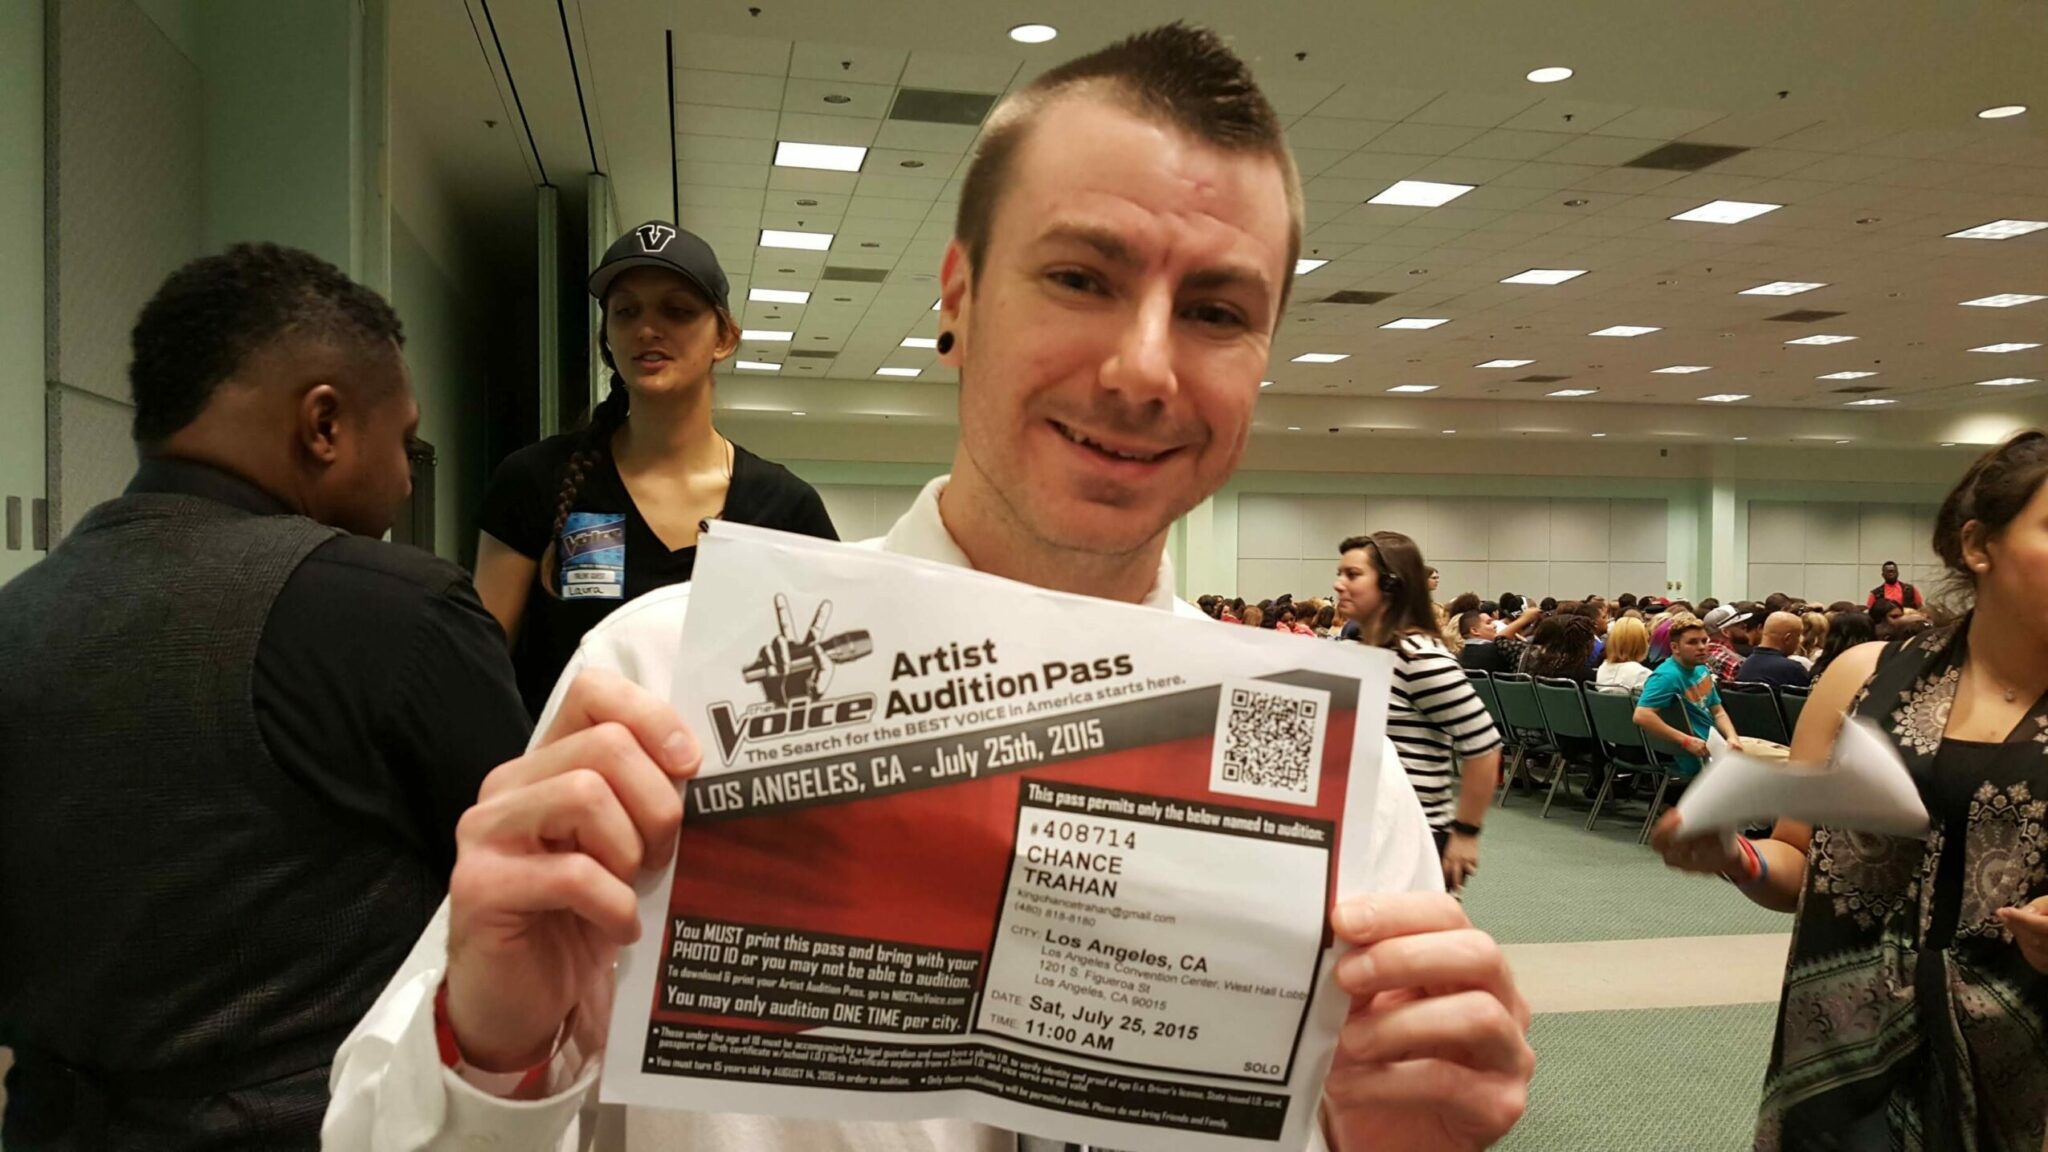 Chance Trahan holding up his audition pass for the TV show The Voice, a competing singer named Dallas Walls is in the background talking to staff